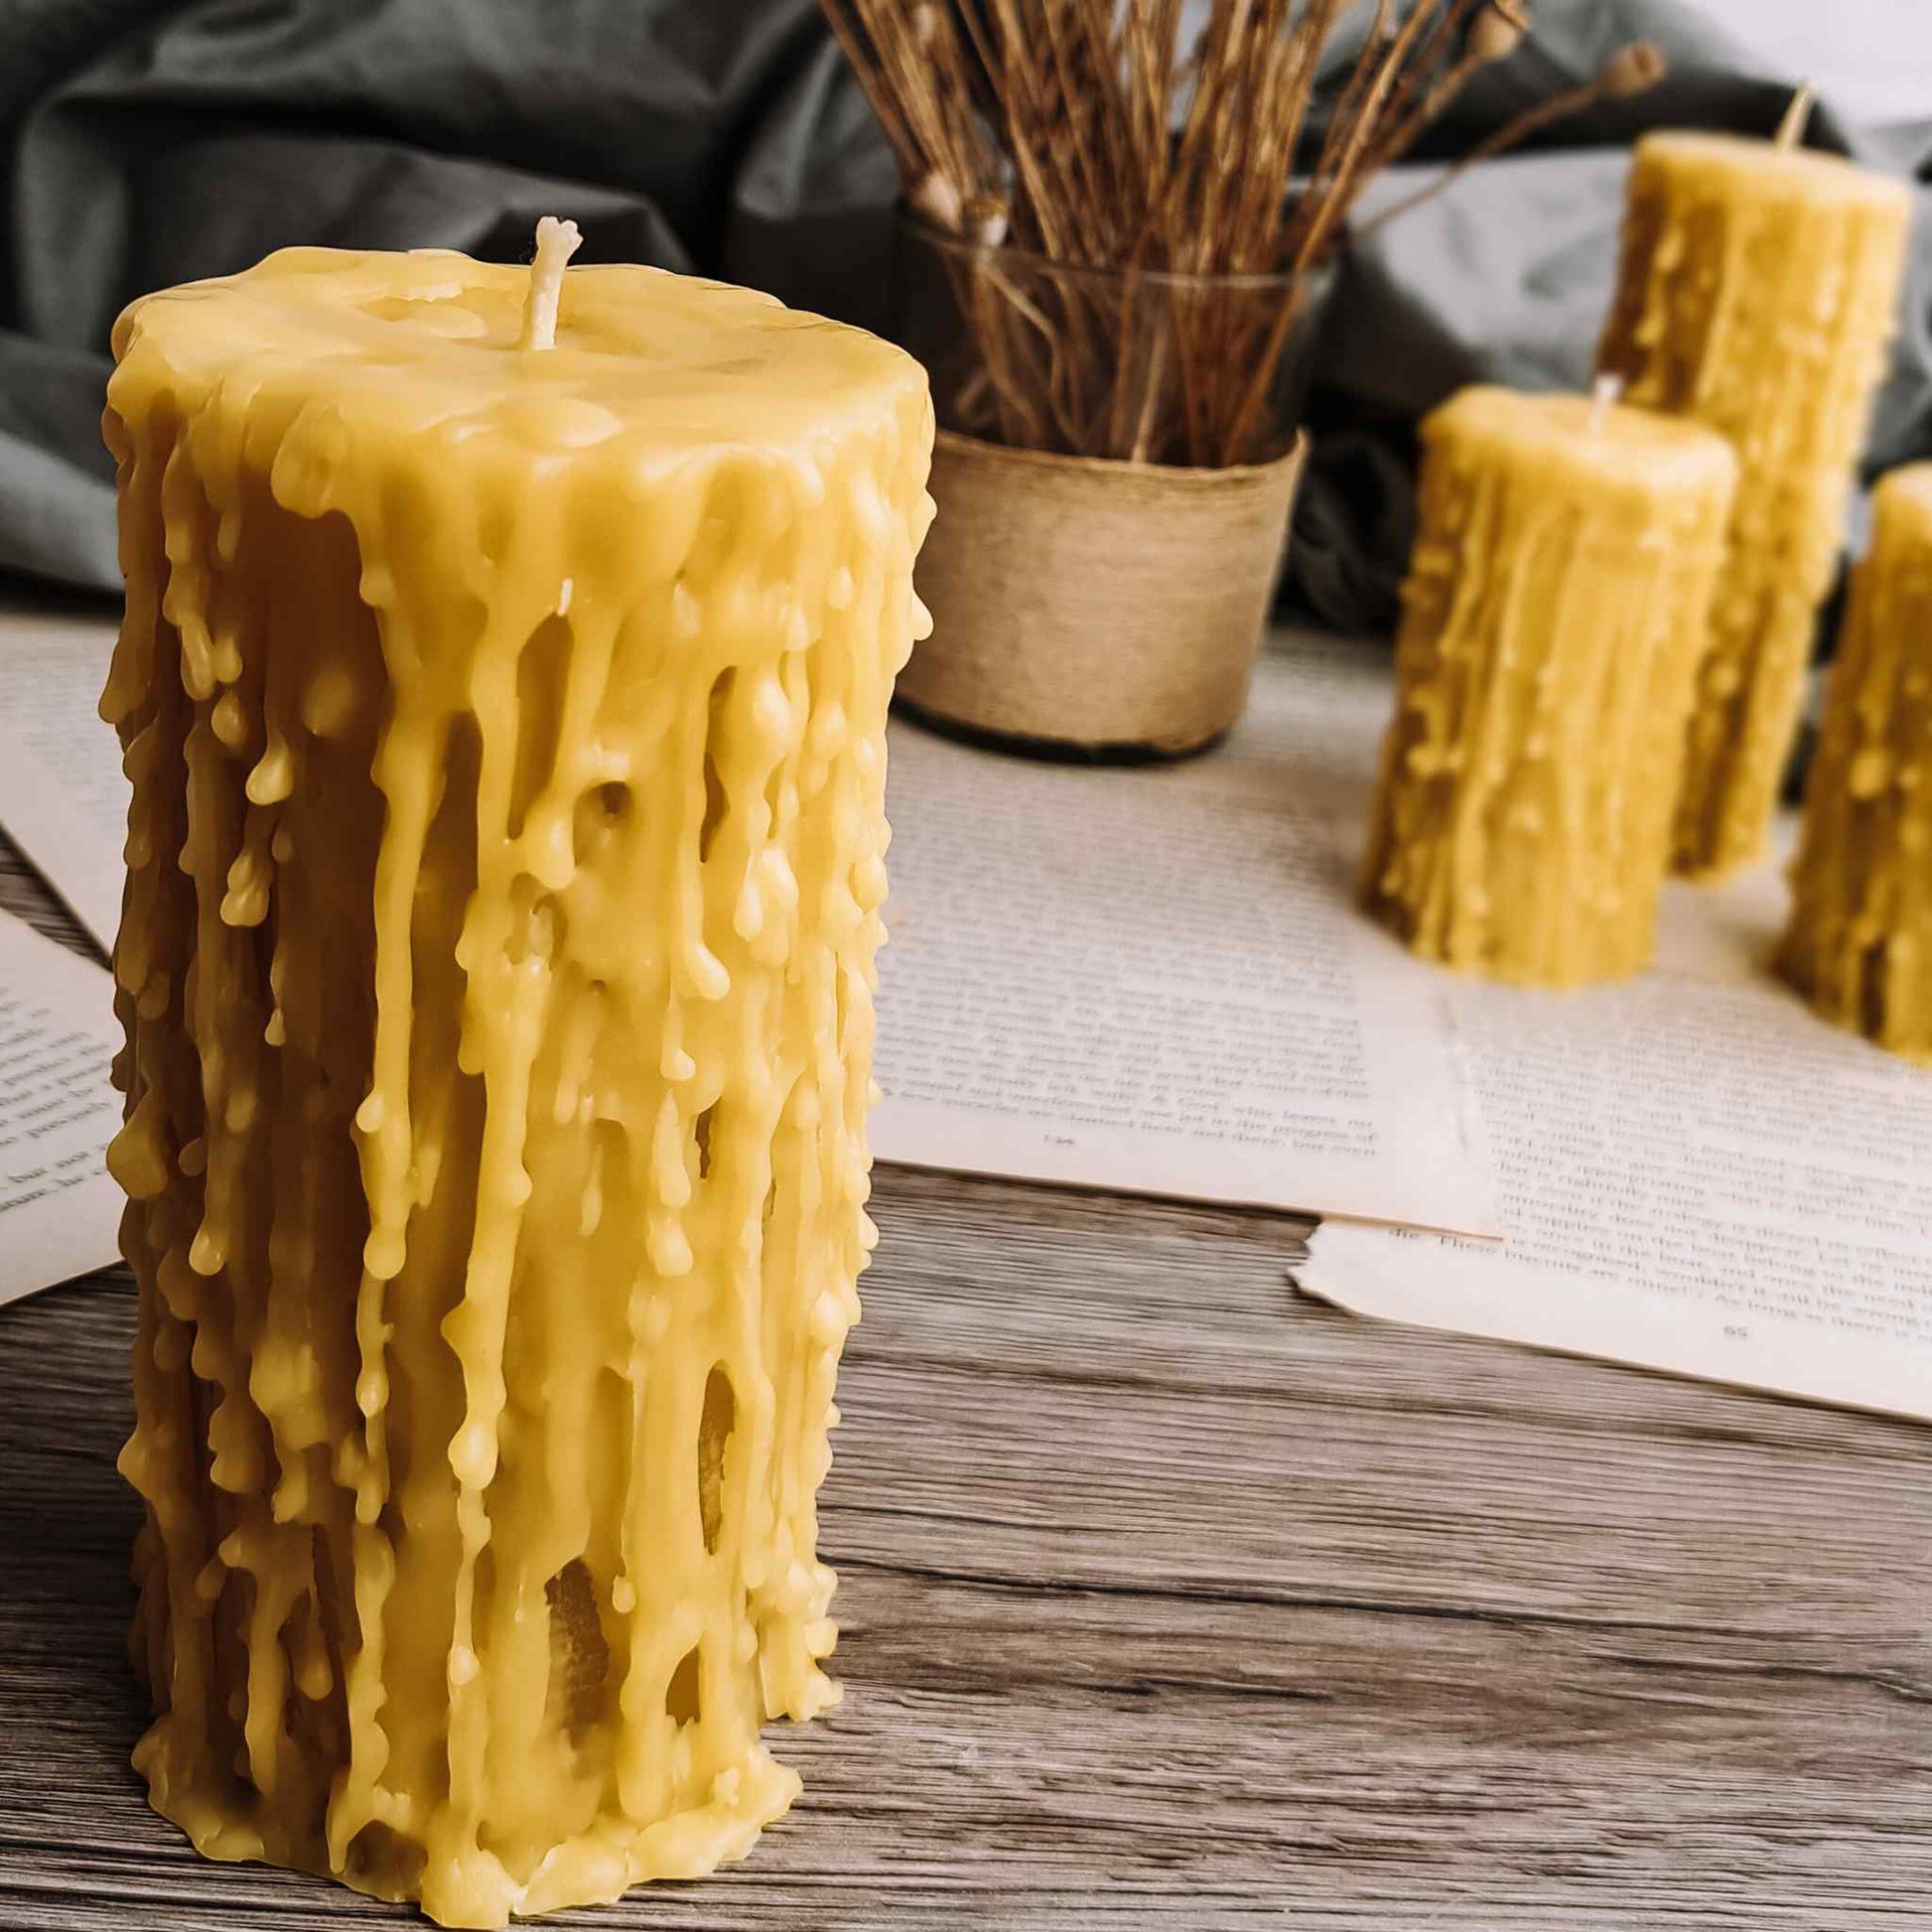 Variety of beeswax candles emitting a soft, warm glow, purifying the air in a serene home environment